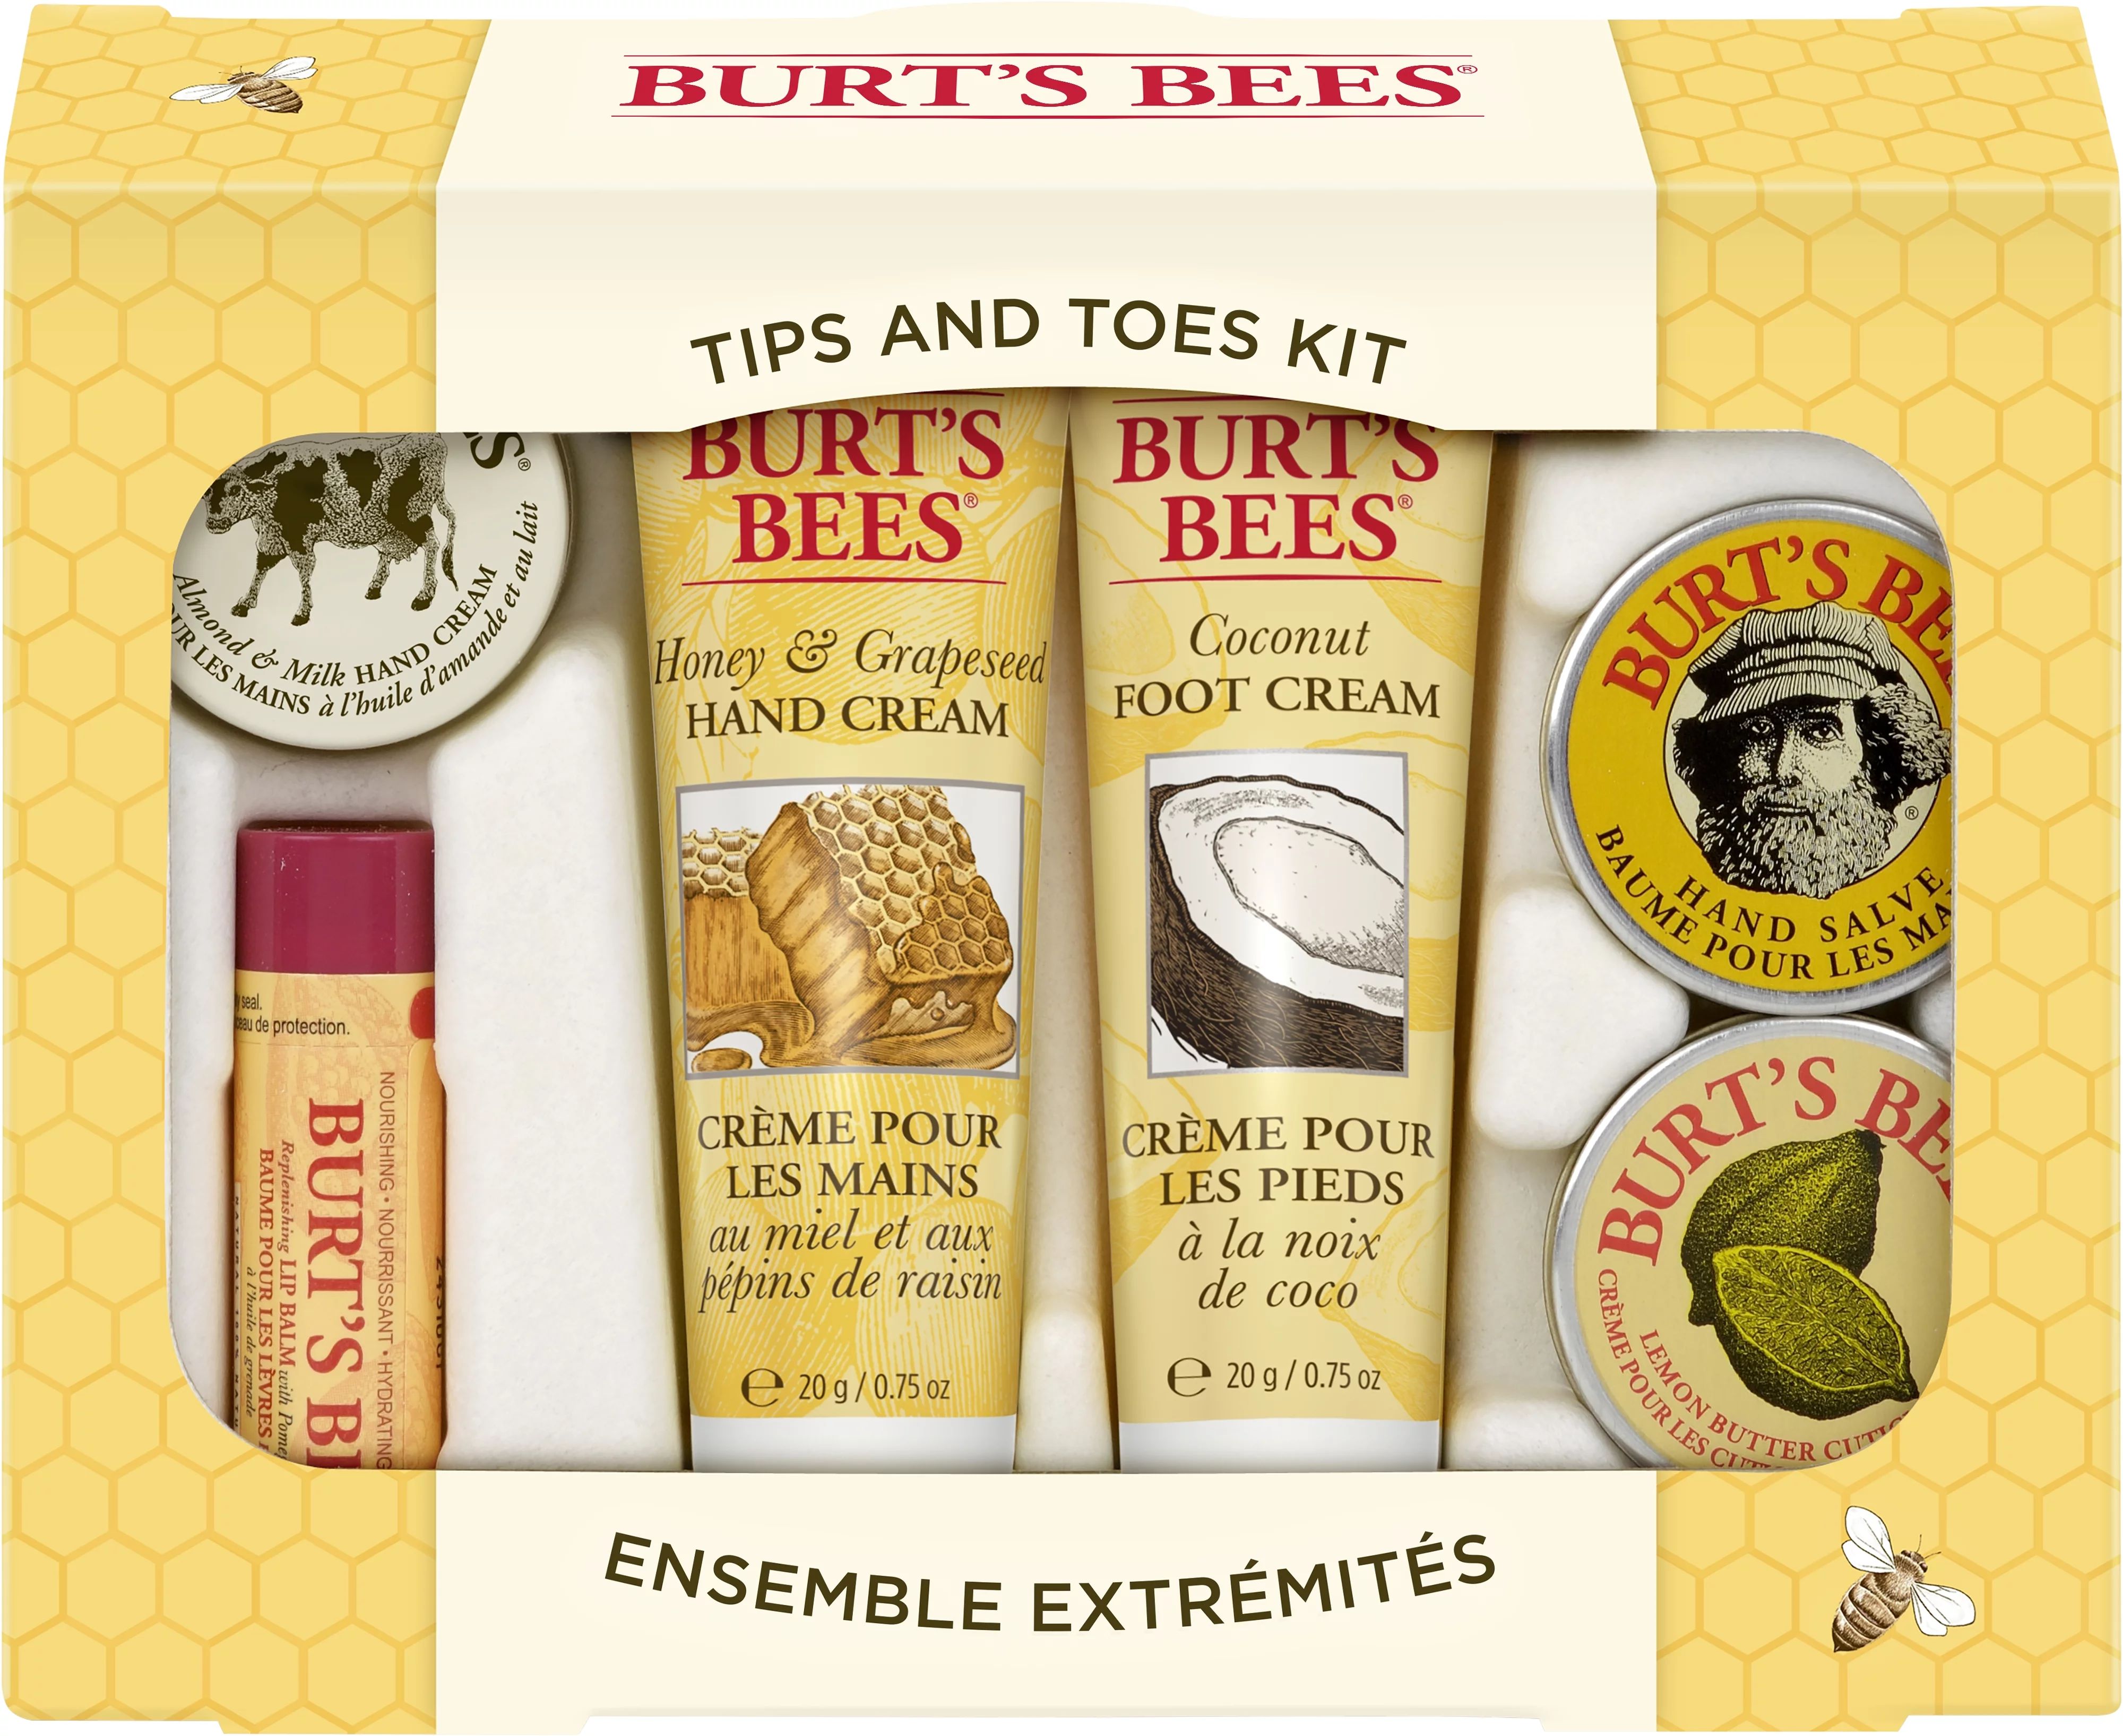 Burt's Bees Tips and Toes Gift Set, 6 Travel Size Products in Gift Box - 2 Hand Creams, Foot Crea... | Walmart (US)